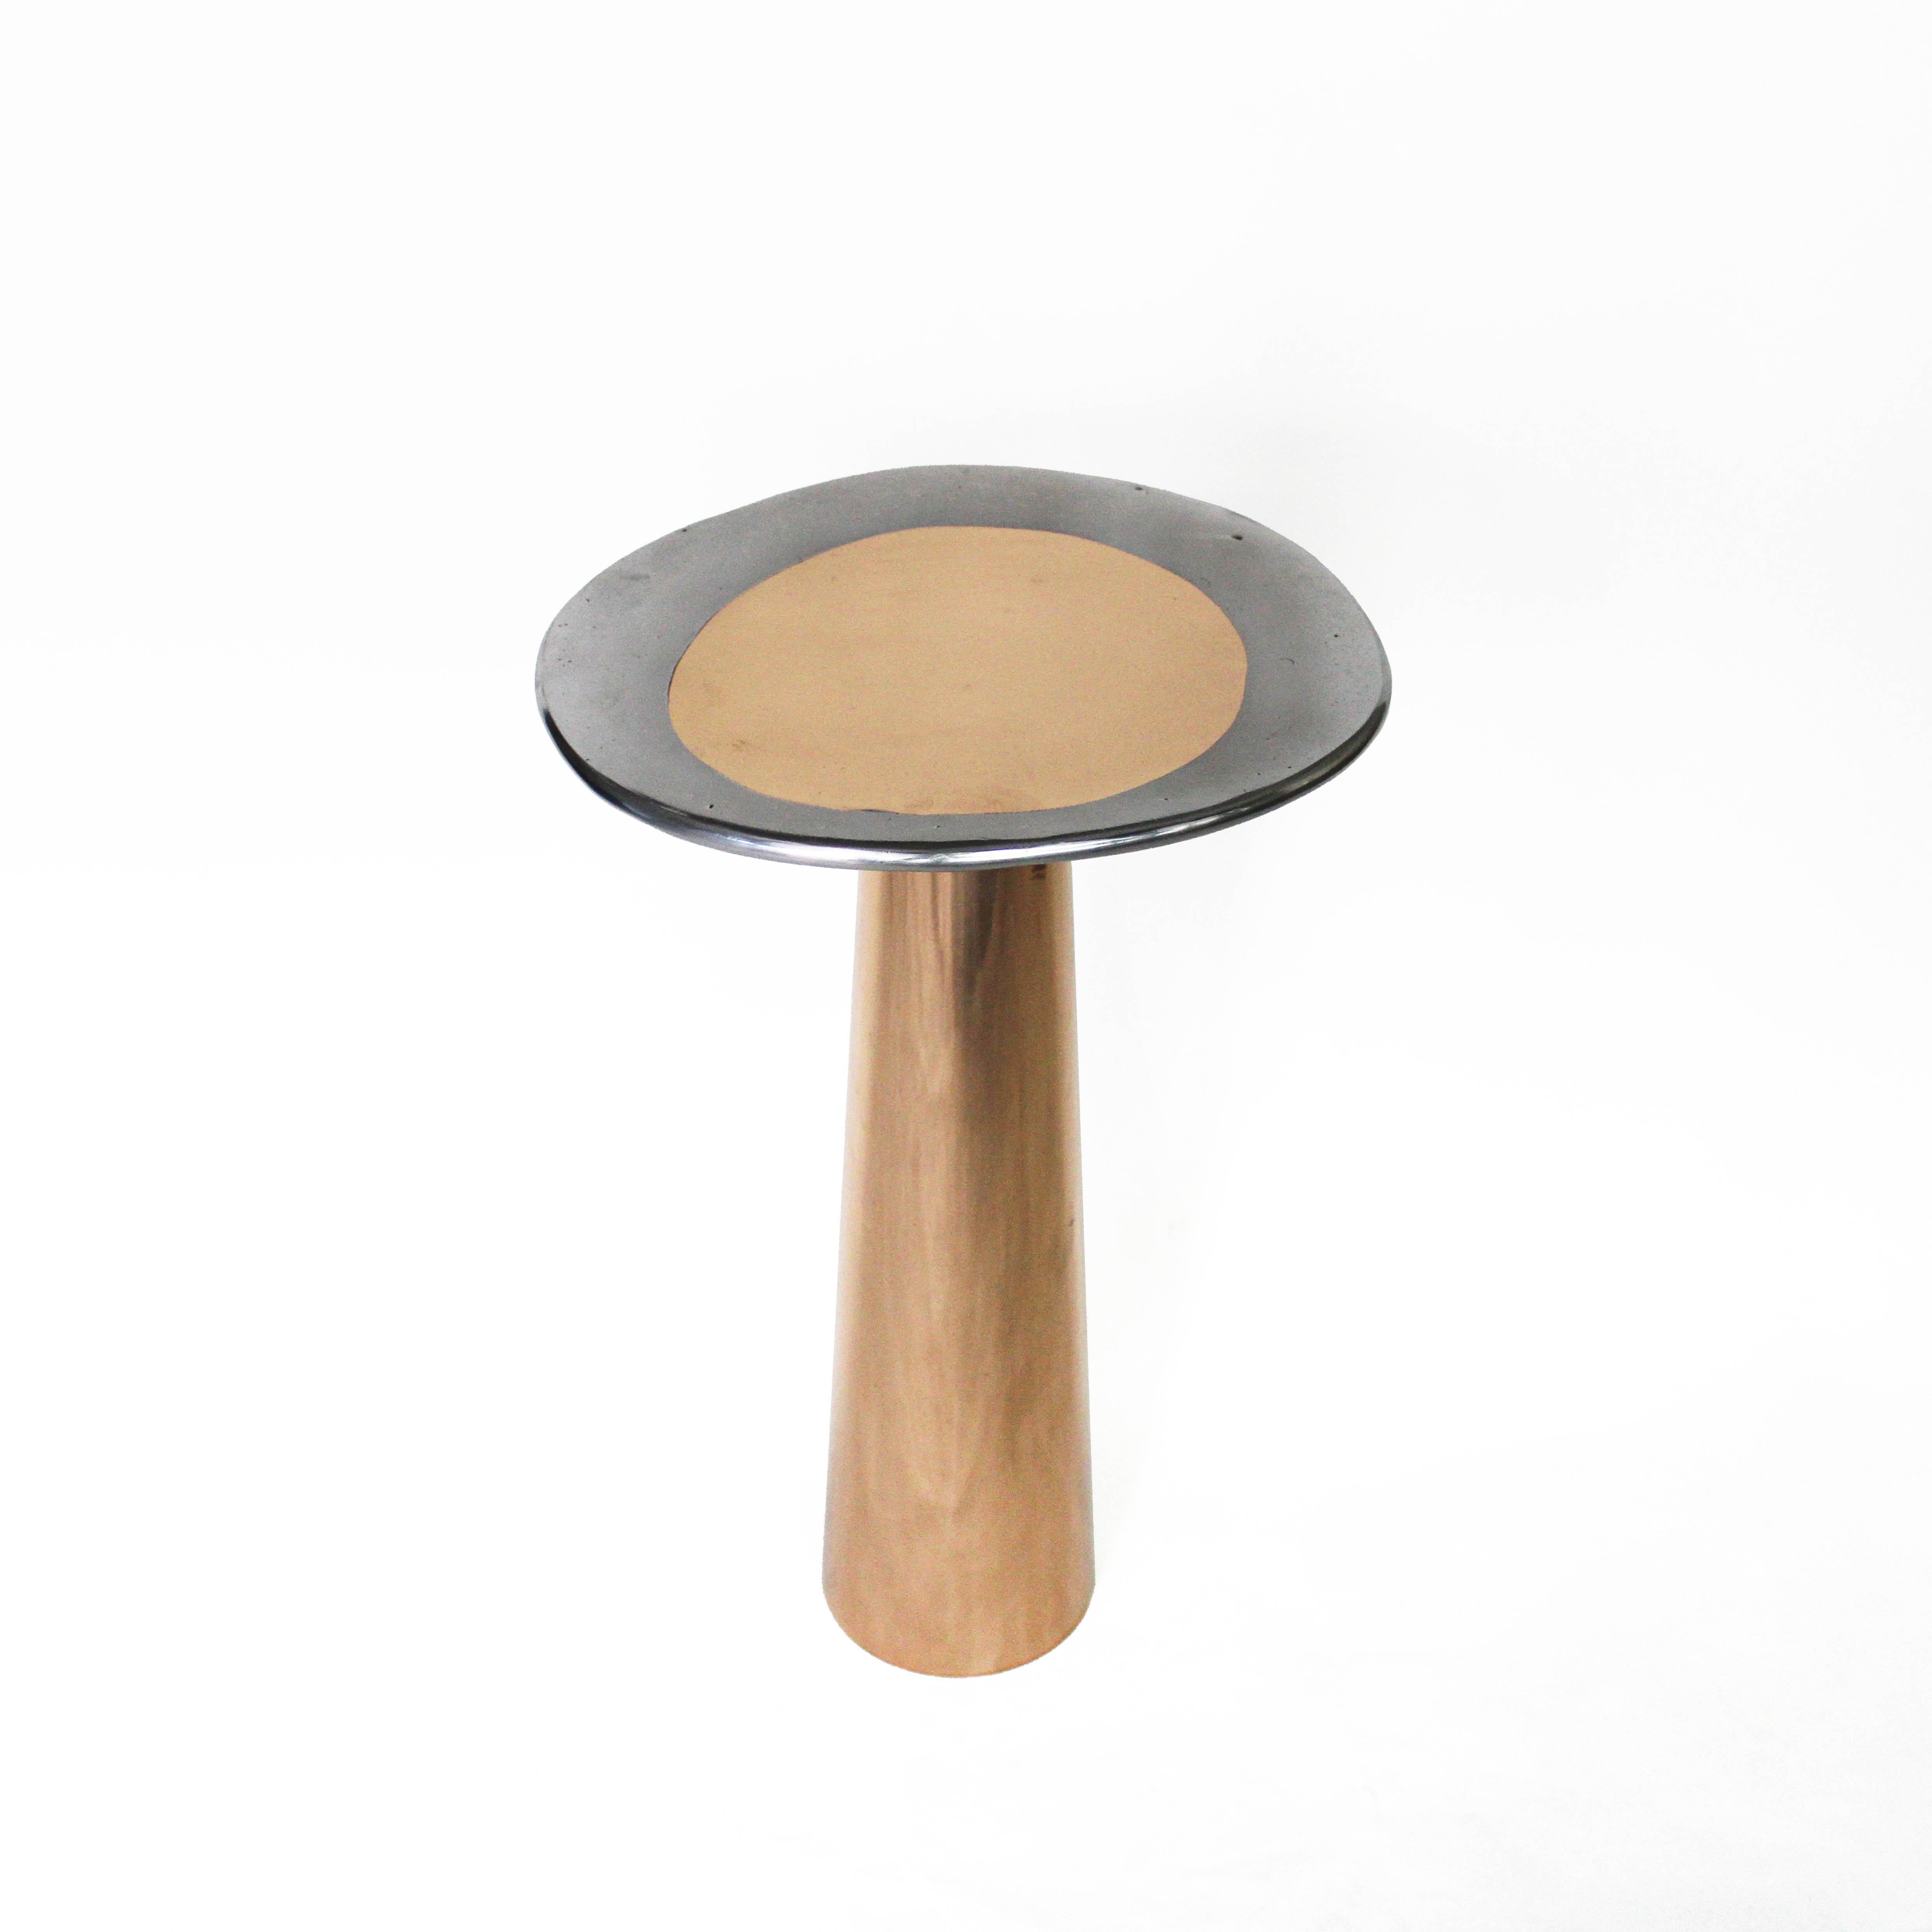 The Cone Table is inspired by the interconnections between the elements and life forms. The conical shape of the base, the asymmetrical form of the top, and the rounded edges provide the table with a silky appearance.

Cone Table, made of bronze or